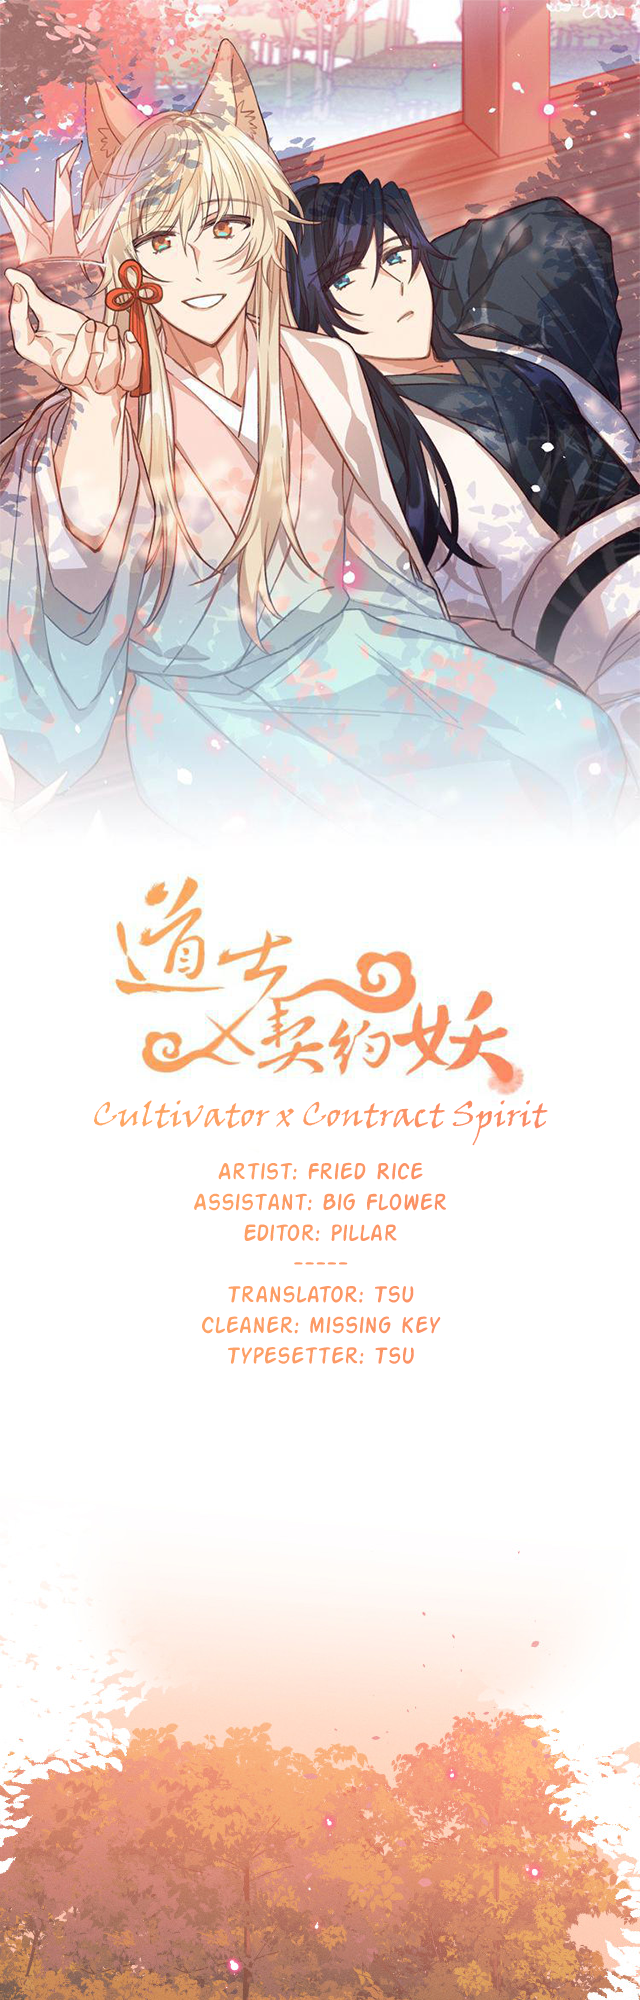 Cultivator X Contract Spirit - Page 1